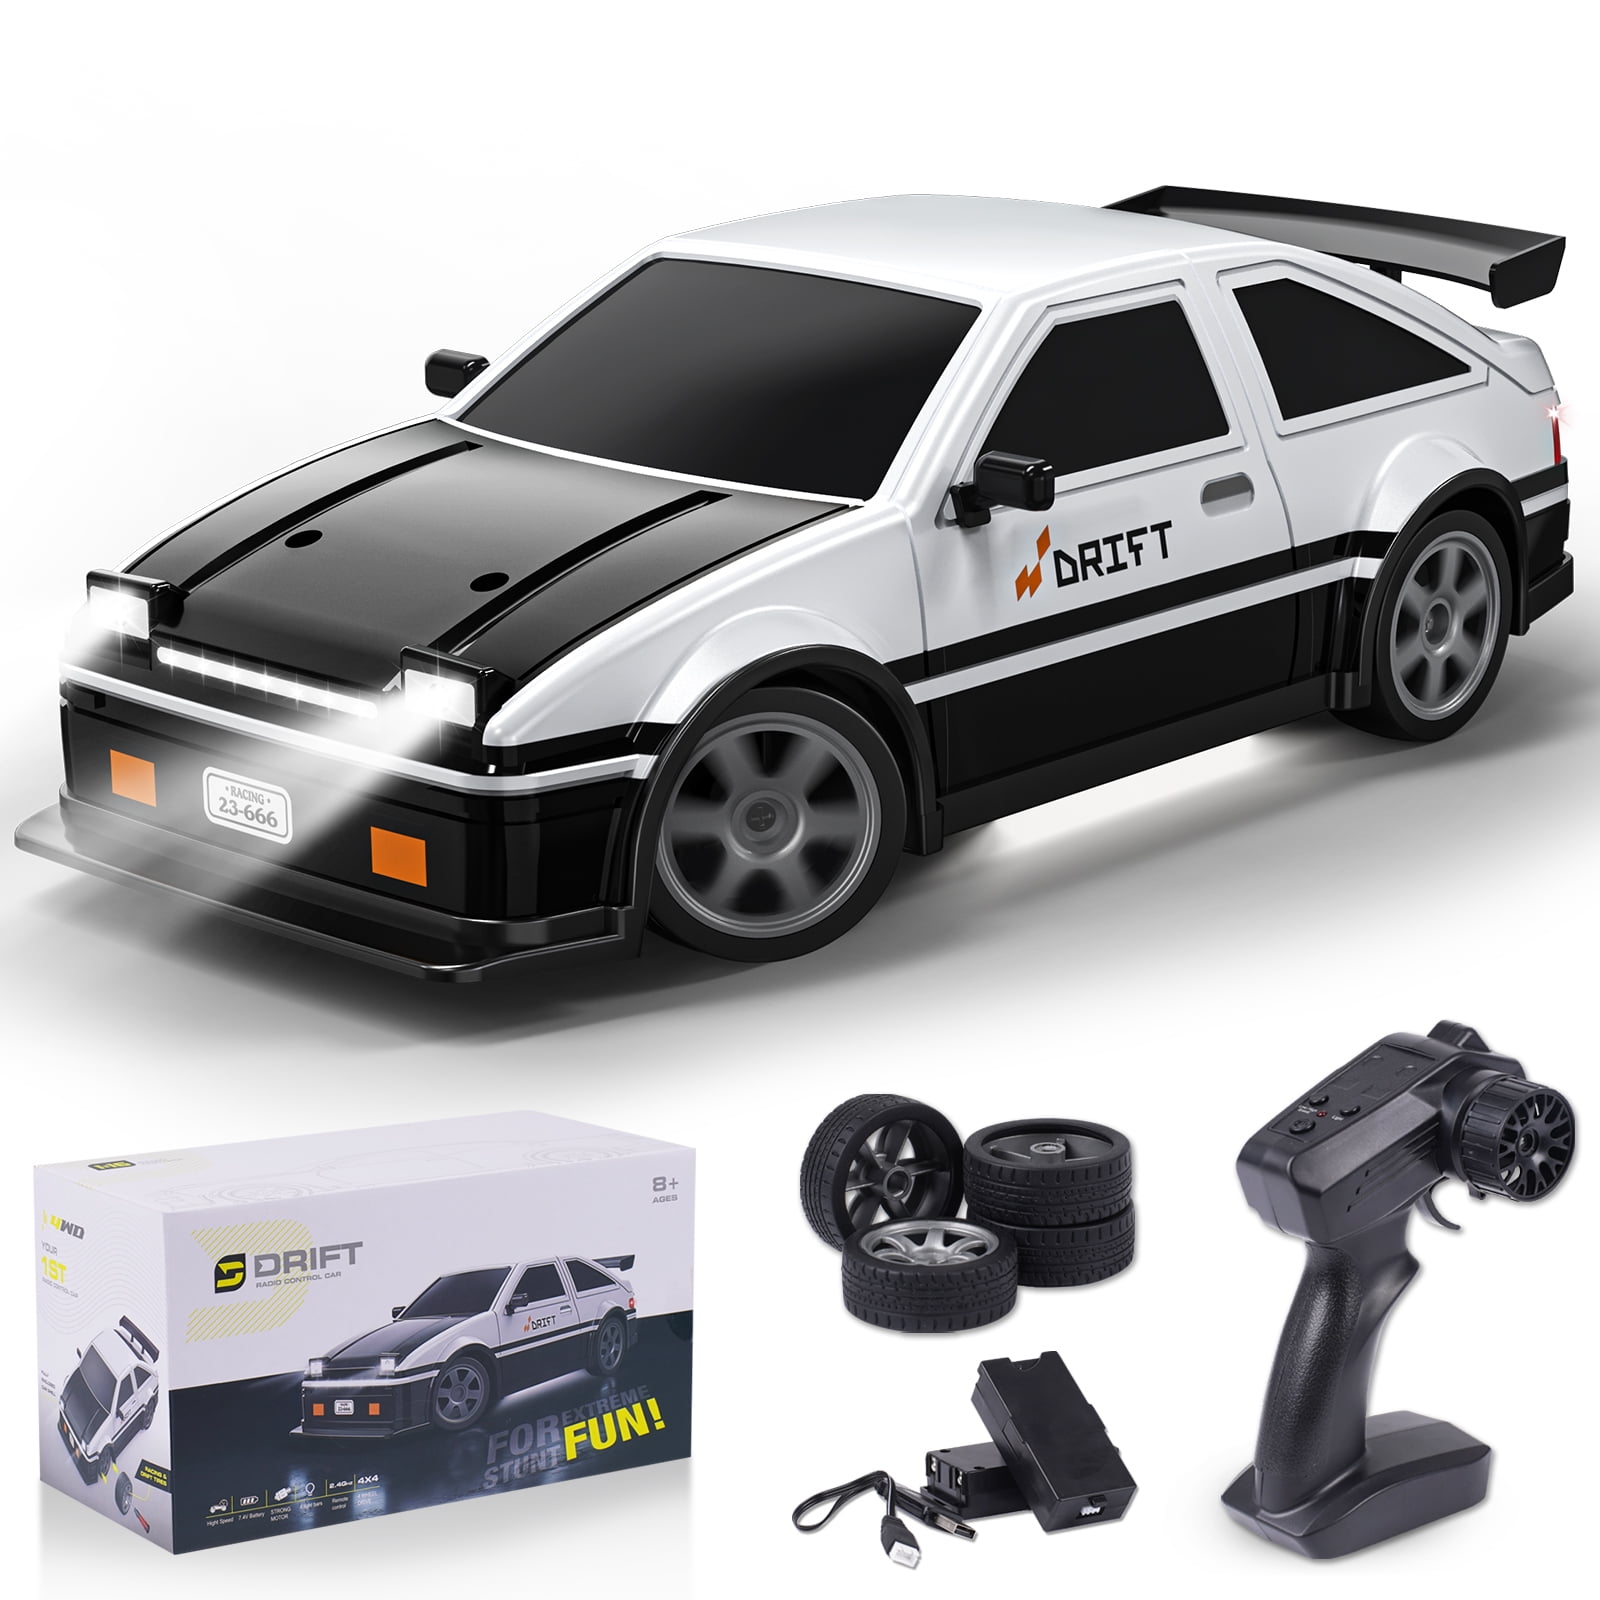 Mojoyce 1:16 Scale RC Car RC Drift Car 4WD Flat Sports Car Kids Racing RC  Toys with LED Light Battery(White) 